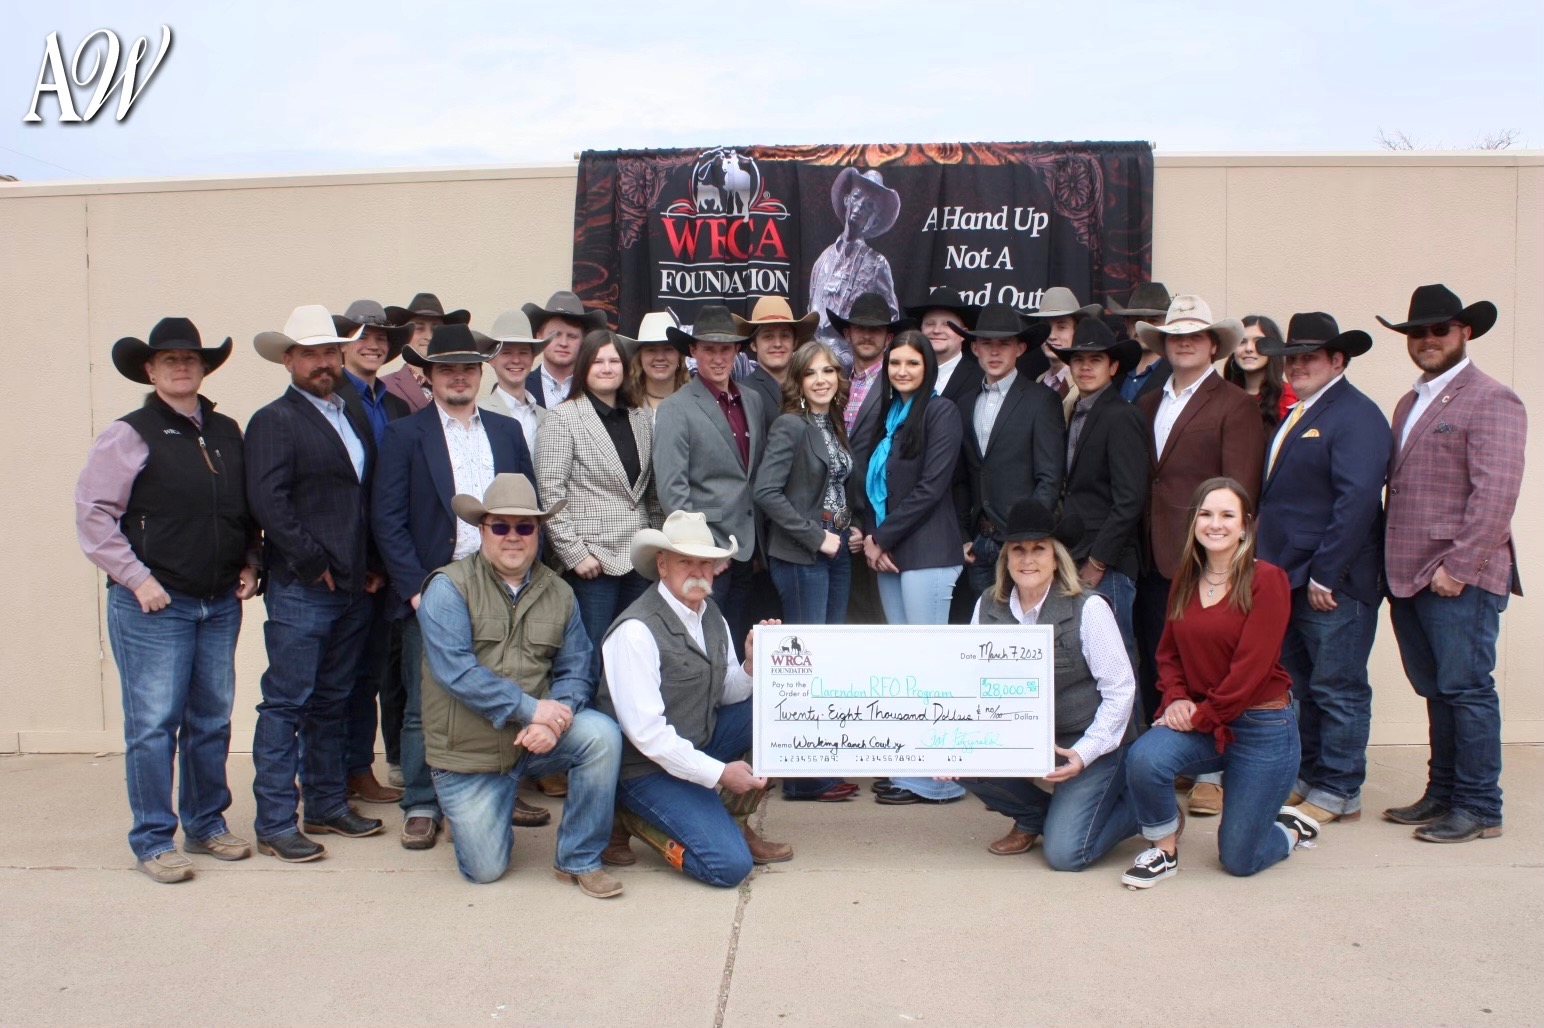 students and faculty from the Clarendon College Ranch Feedlot Operations program stand with members of the WRCA Foundation around a $28,000 check